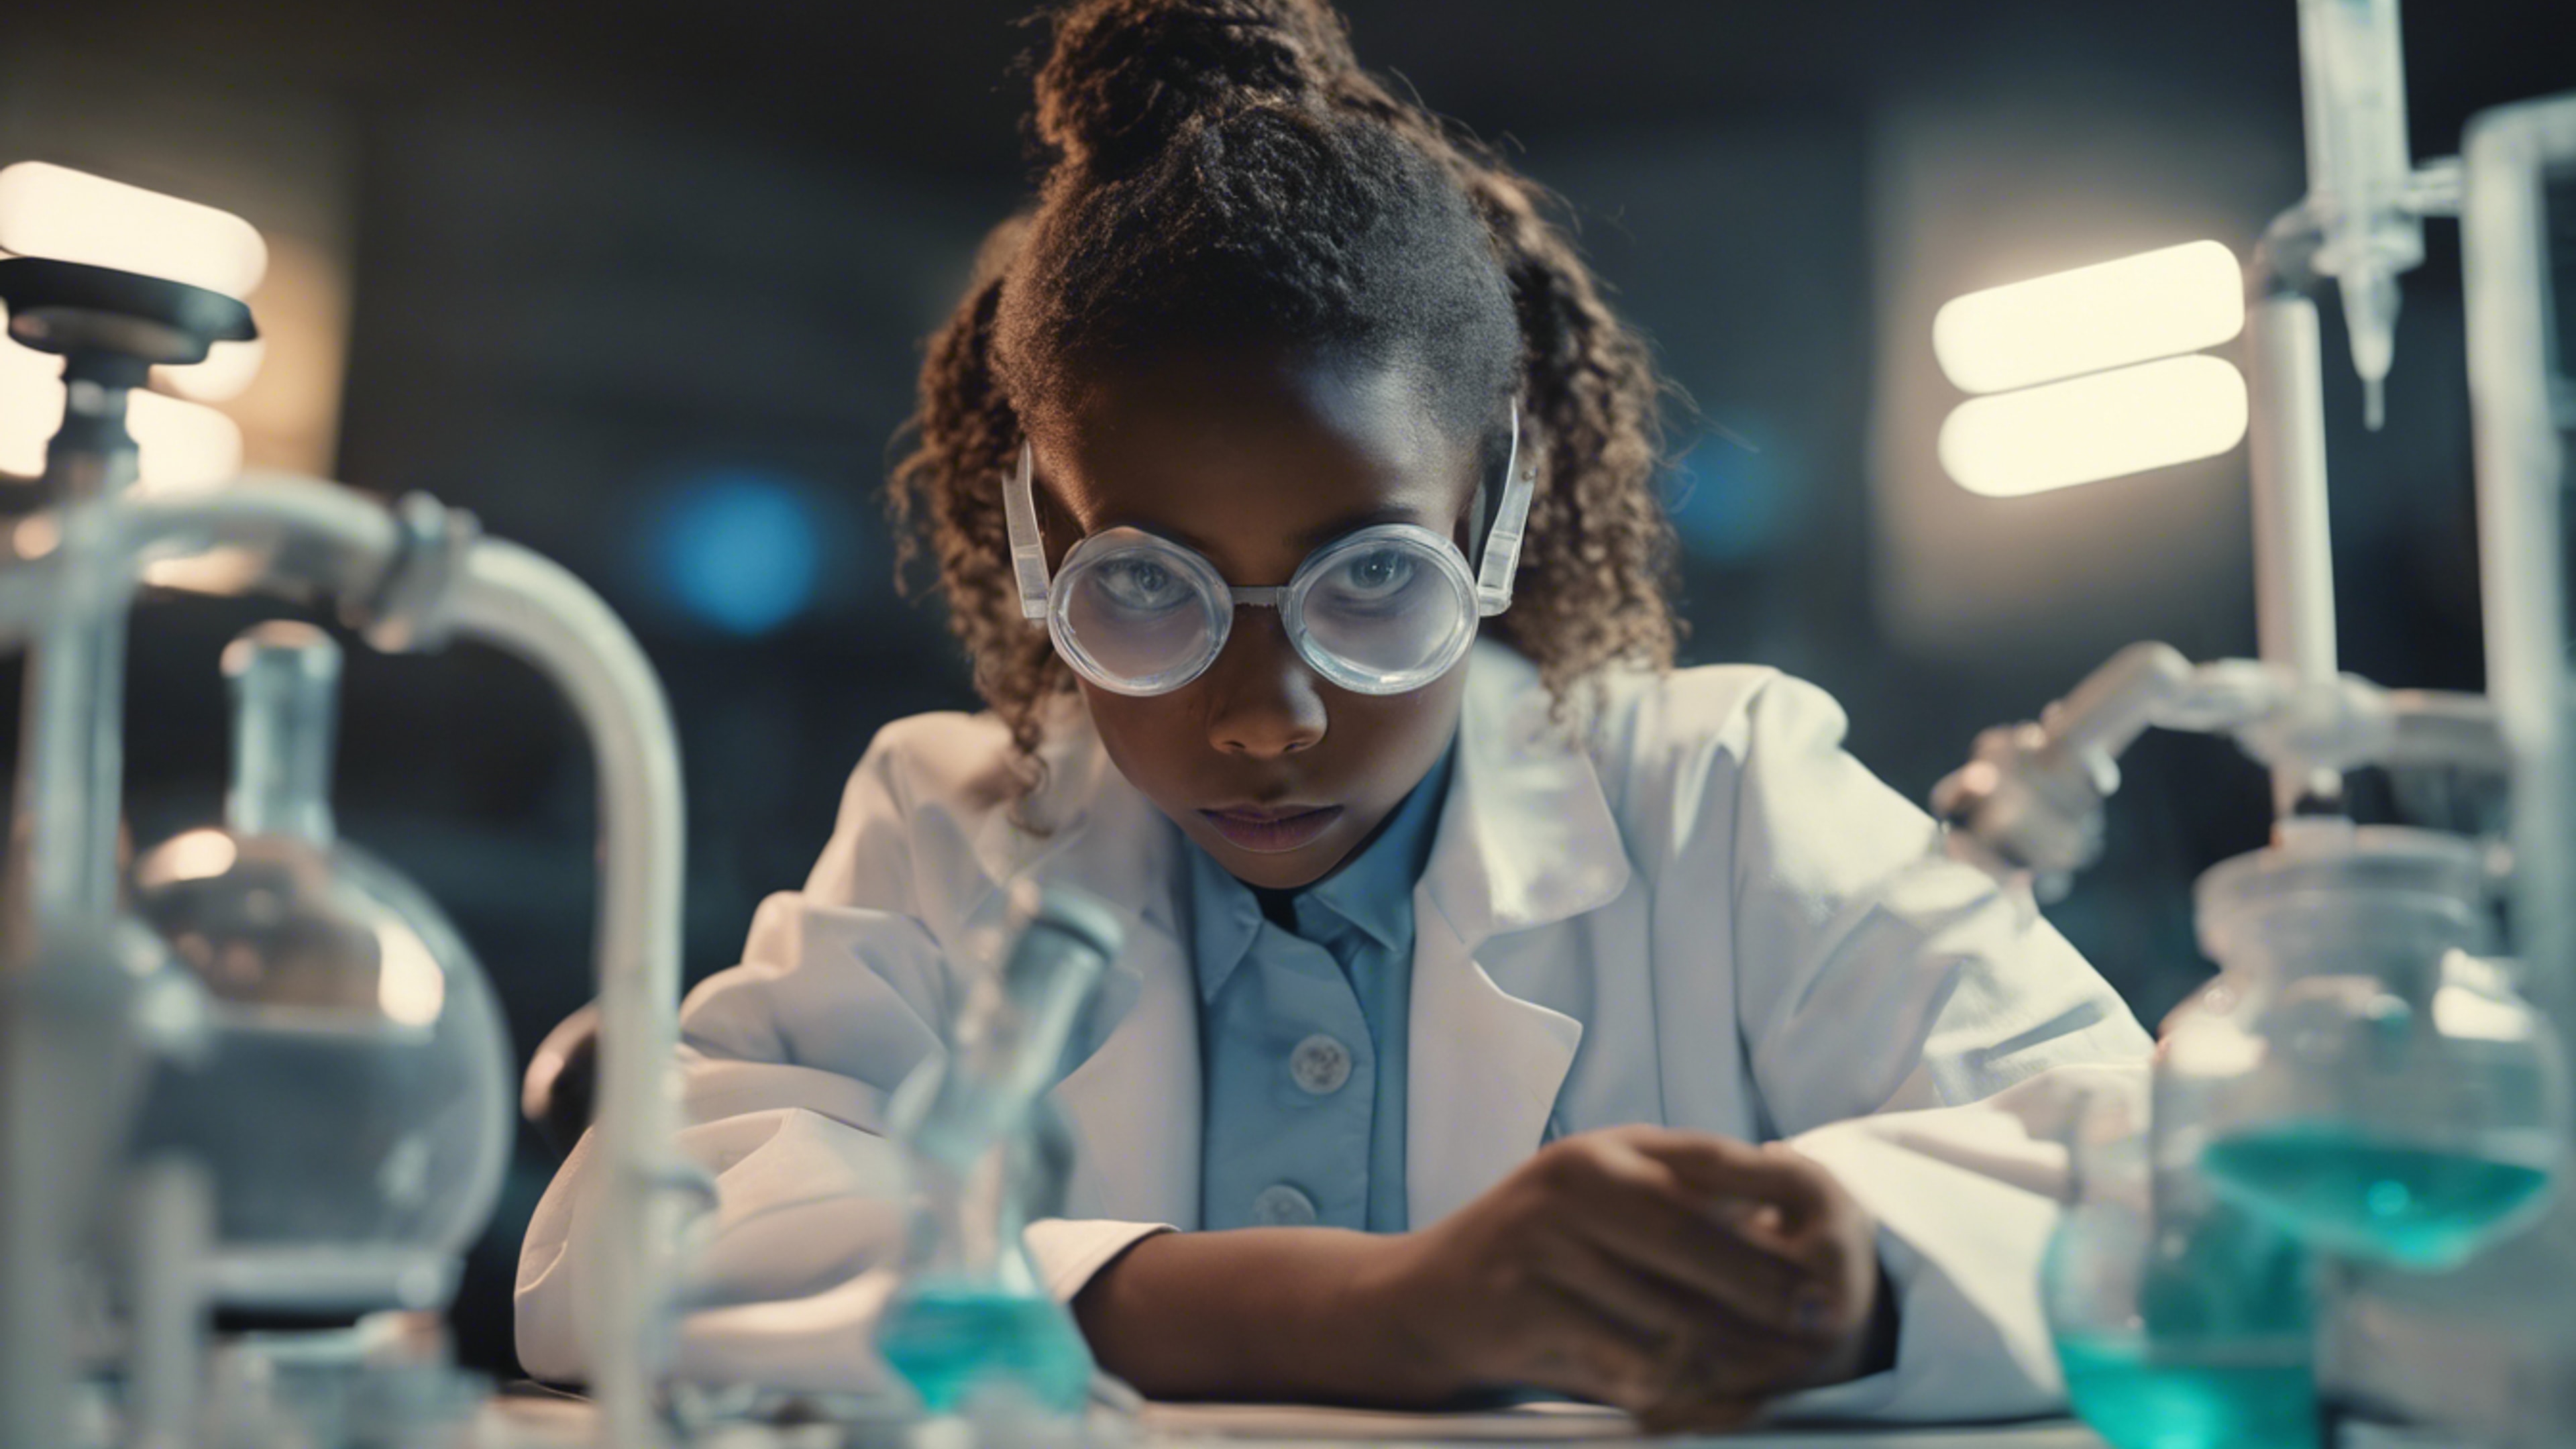 A young black girl wearing goggles and lab coat immersed in doing science experiment. Tapeta[448c919503a247f79693]